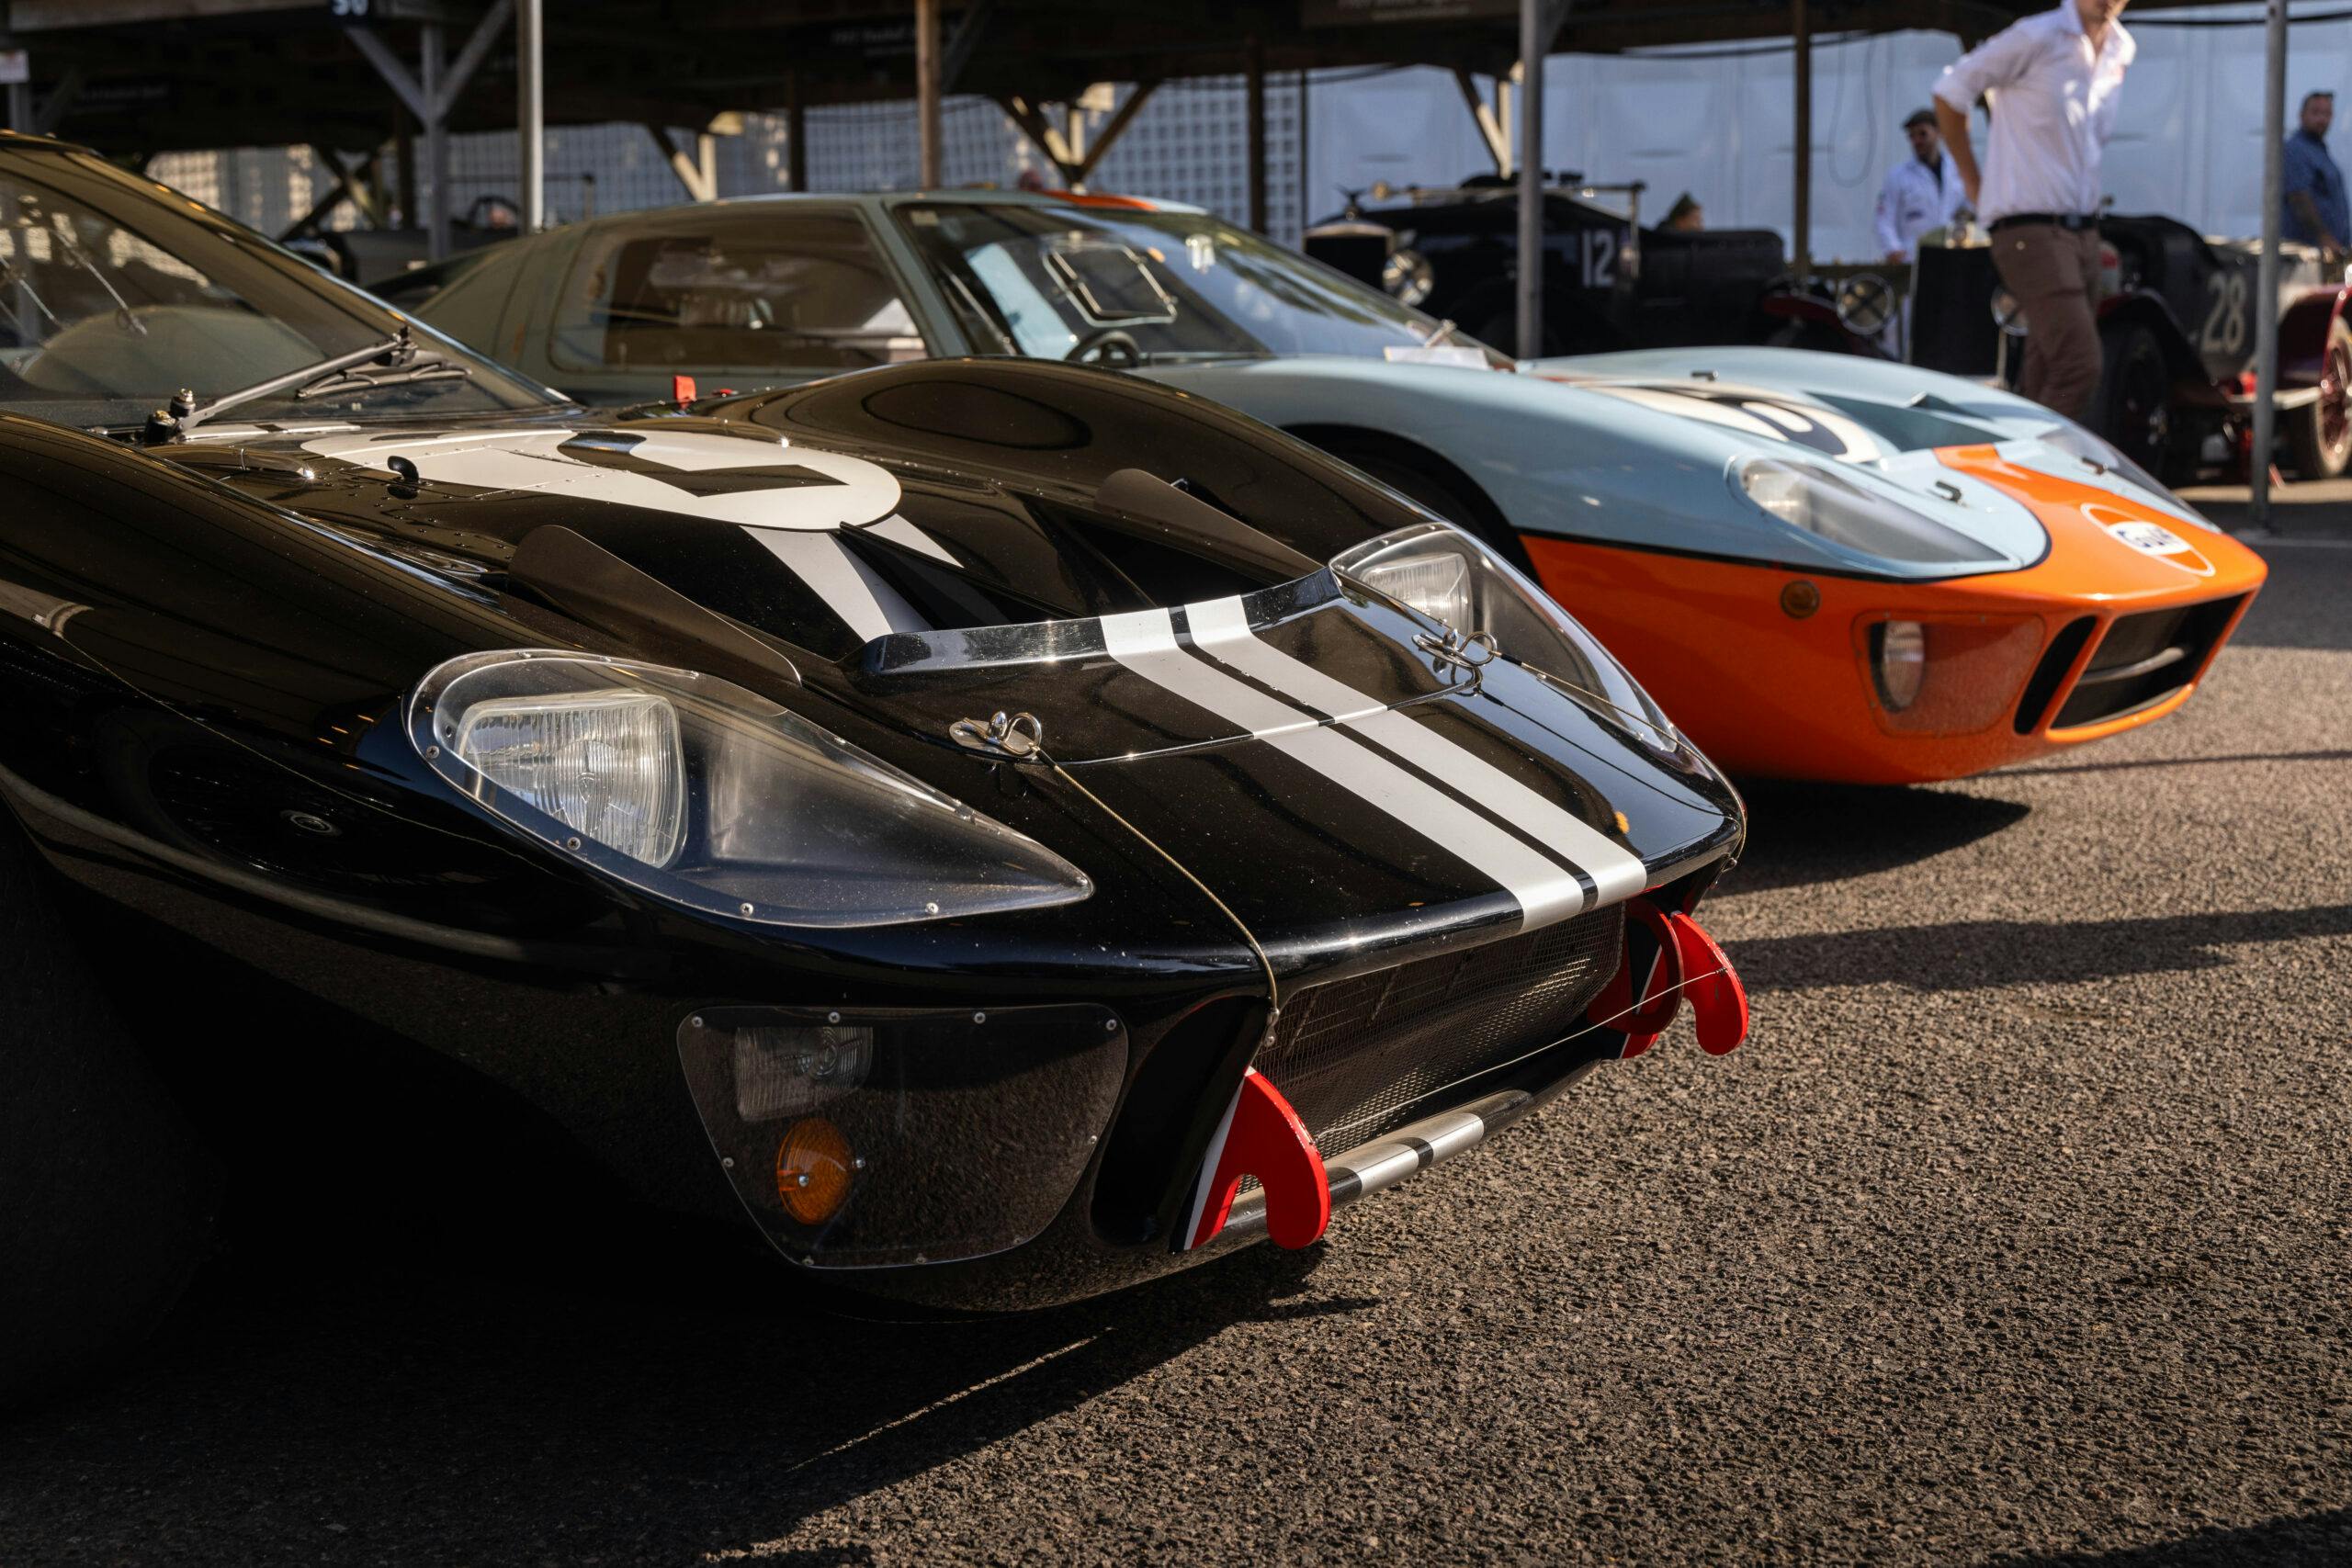 2023 Goodwood ford gt fronts paddock